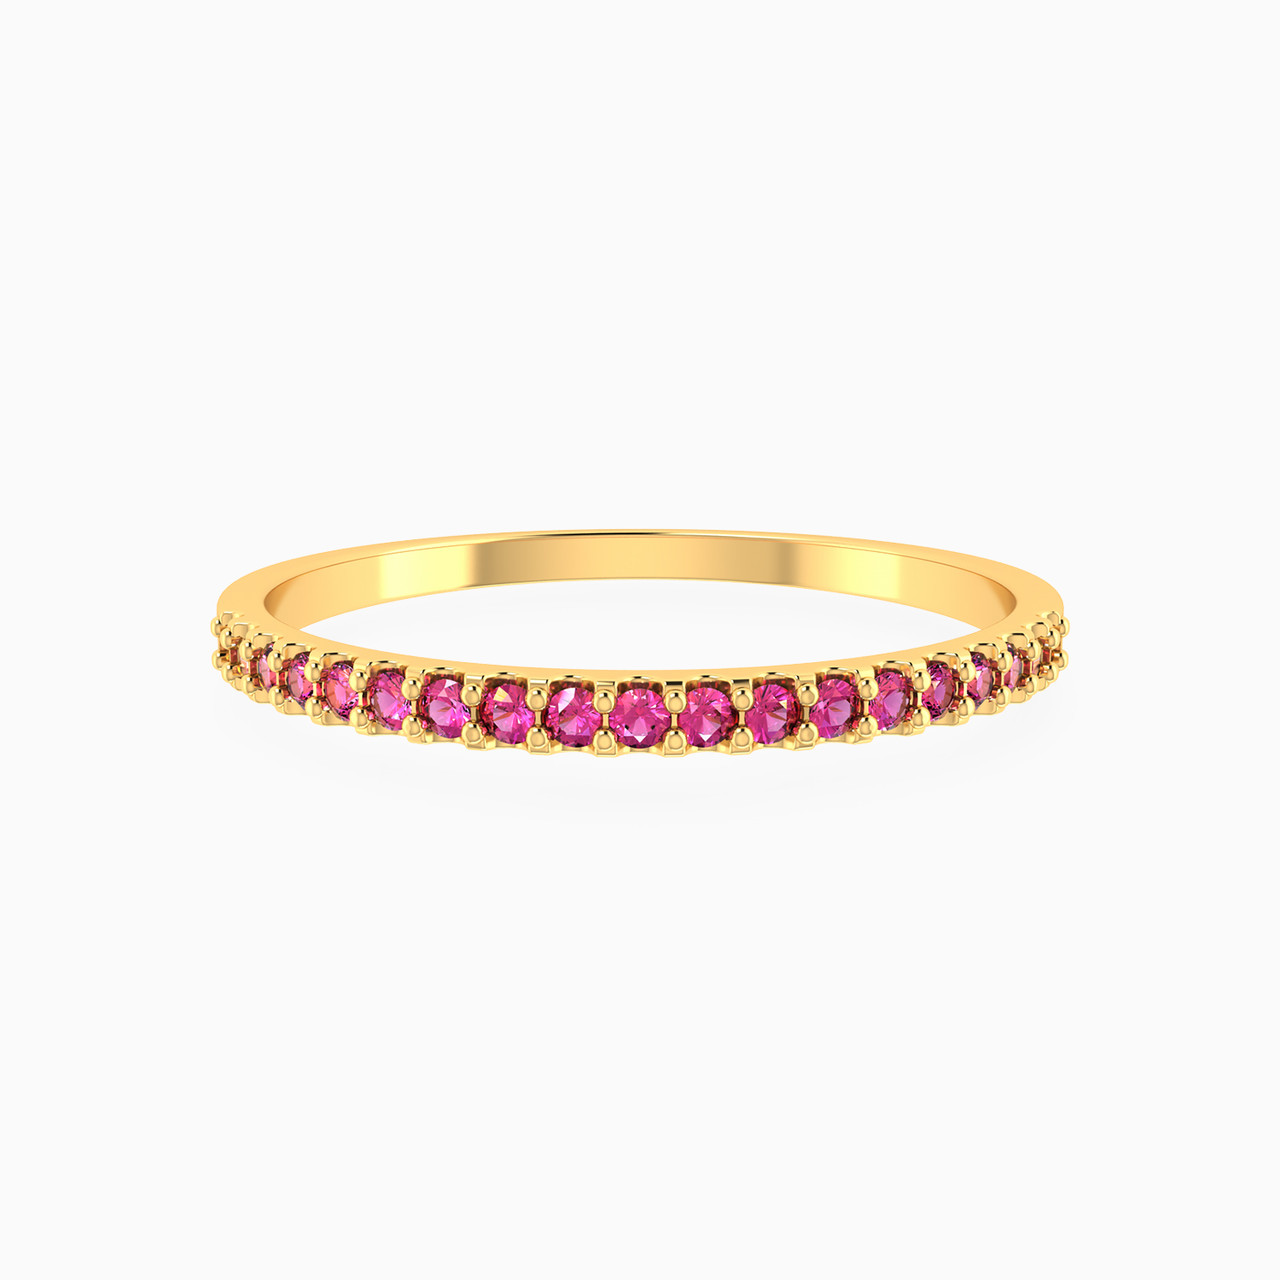 Round Shaped Colored Stones Statement Ring in 14K Gold 